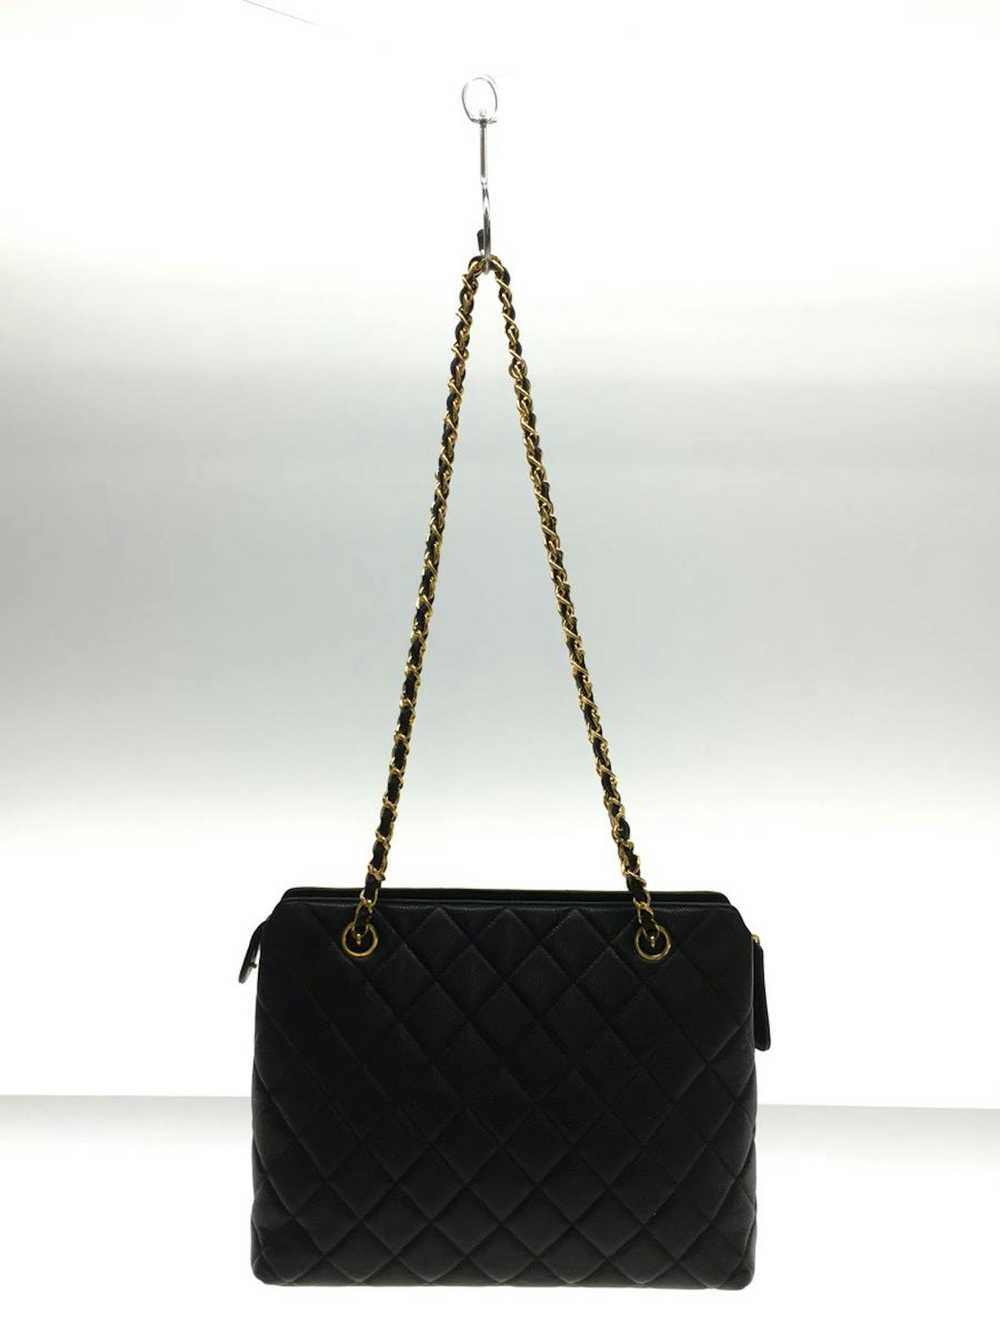 Chanel Chanel Leather Matelasse Tote Bag - image 3